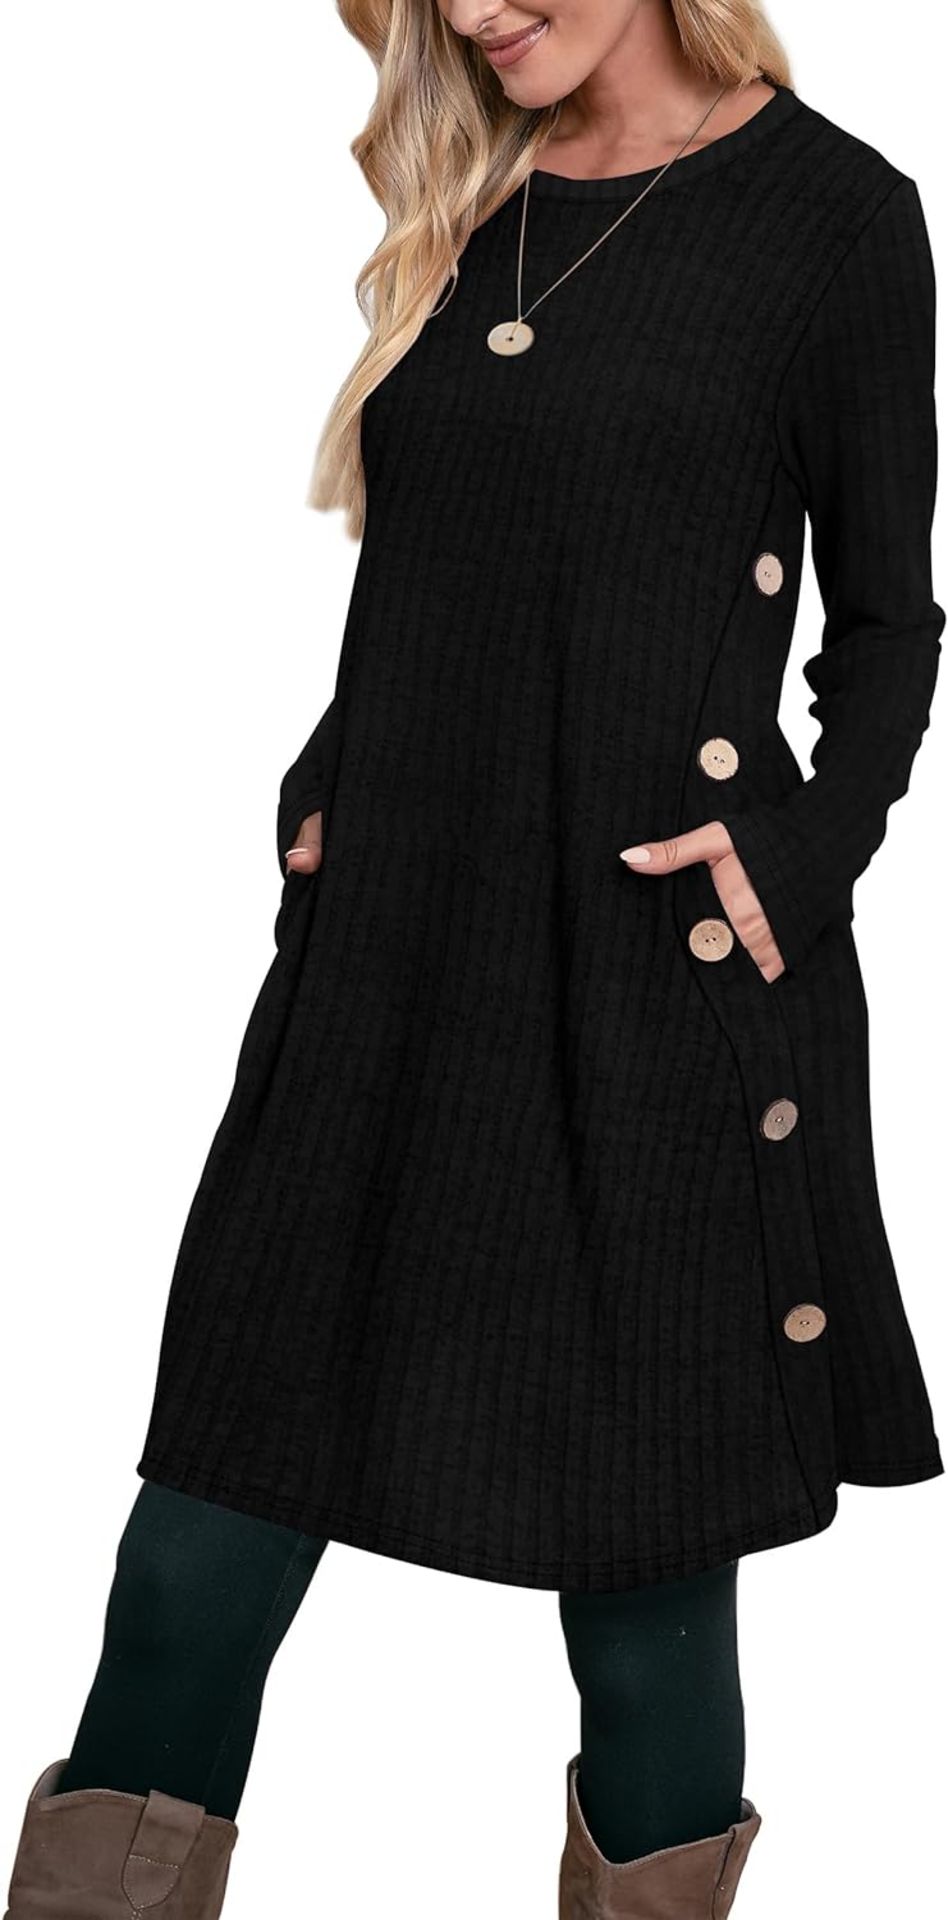 Approx RRP £450, Collection of Aokosor Women's Dresses and Jumpers, 20 Pieces - Image 3 of 4